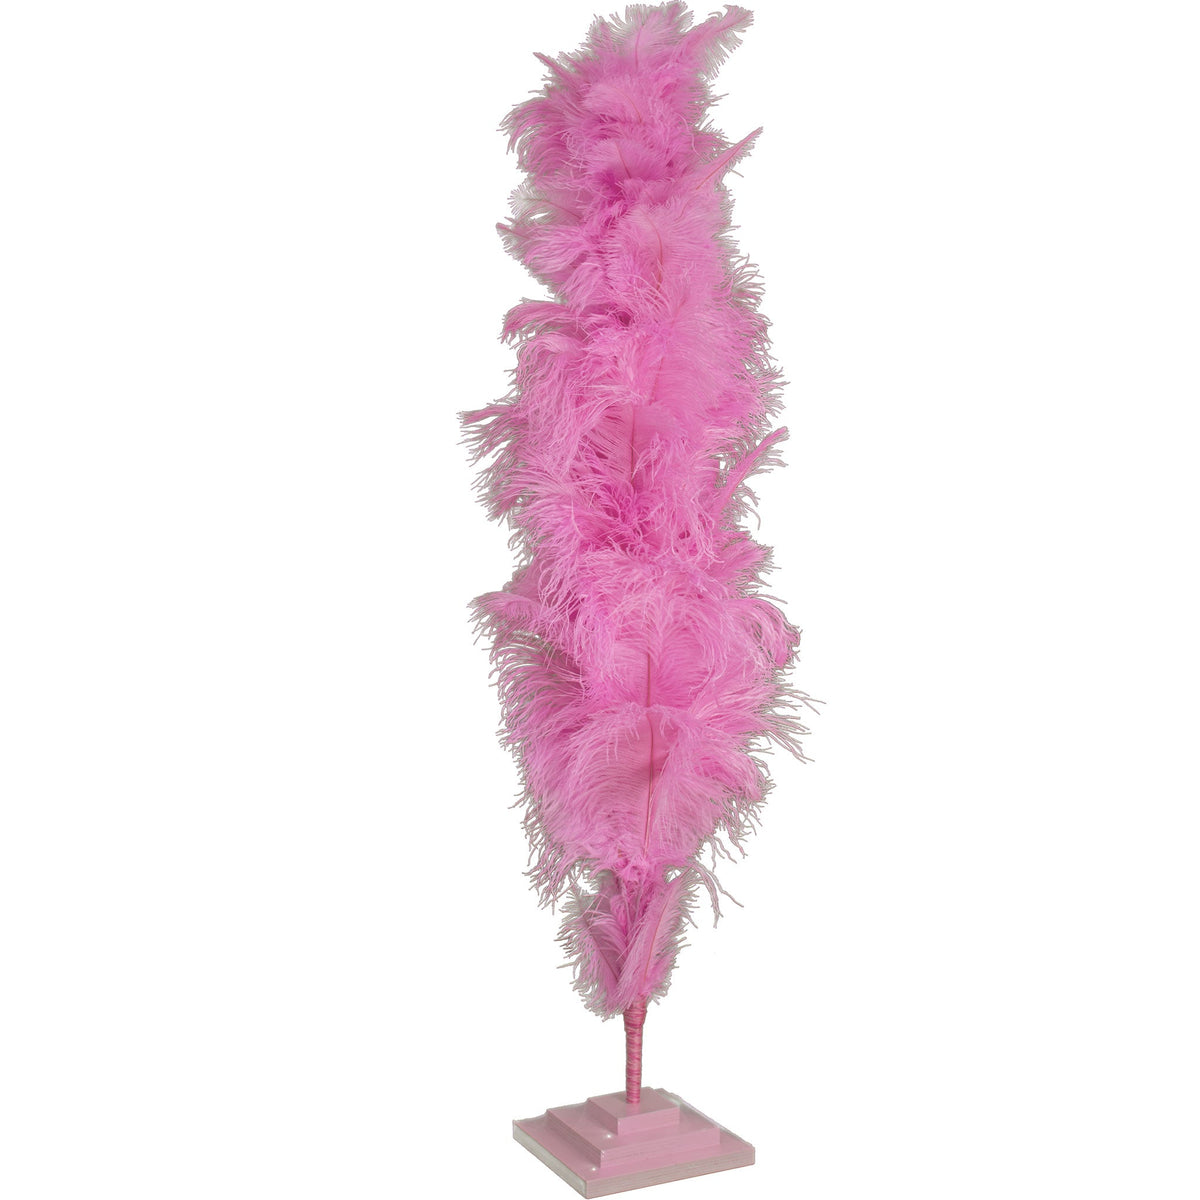 4ft tall pink ostrich feather trees are made for Easy Storage - Strong bendable wire can be wrapped into any type of storage box